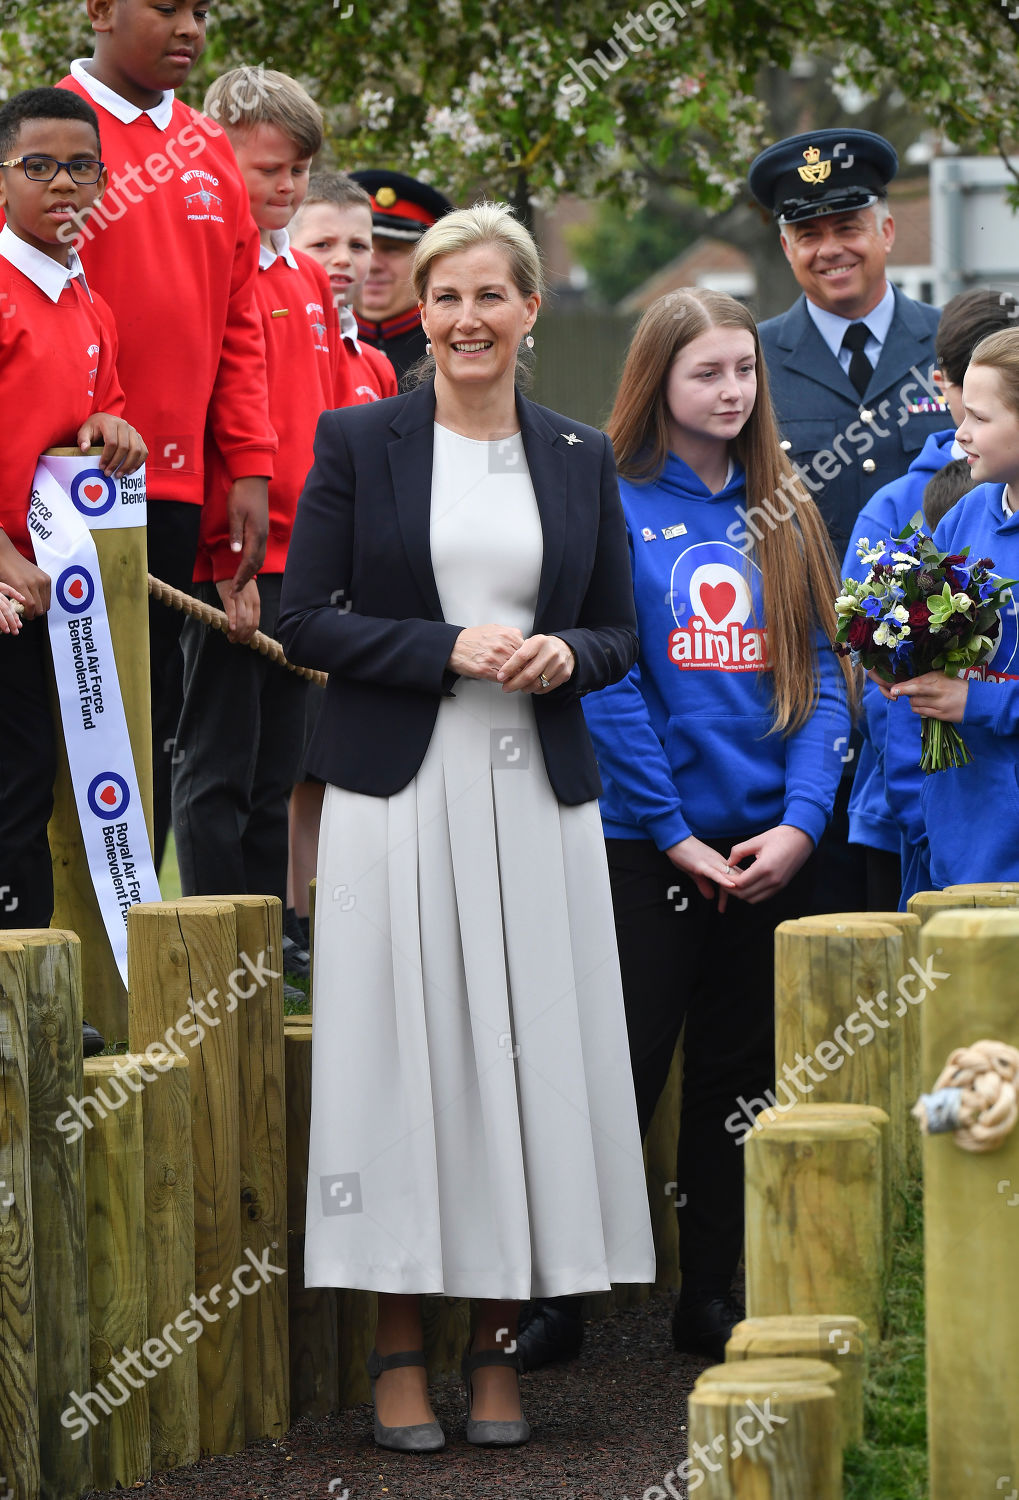 sophie-countess-of-wessex-opens-airplay-play-park-wittering-village-peterborough-uk-shutterstock-editorial-10217568ai.jpg